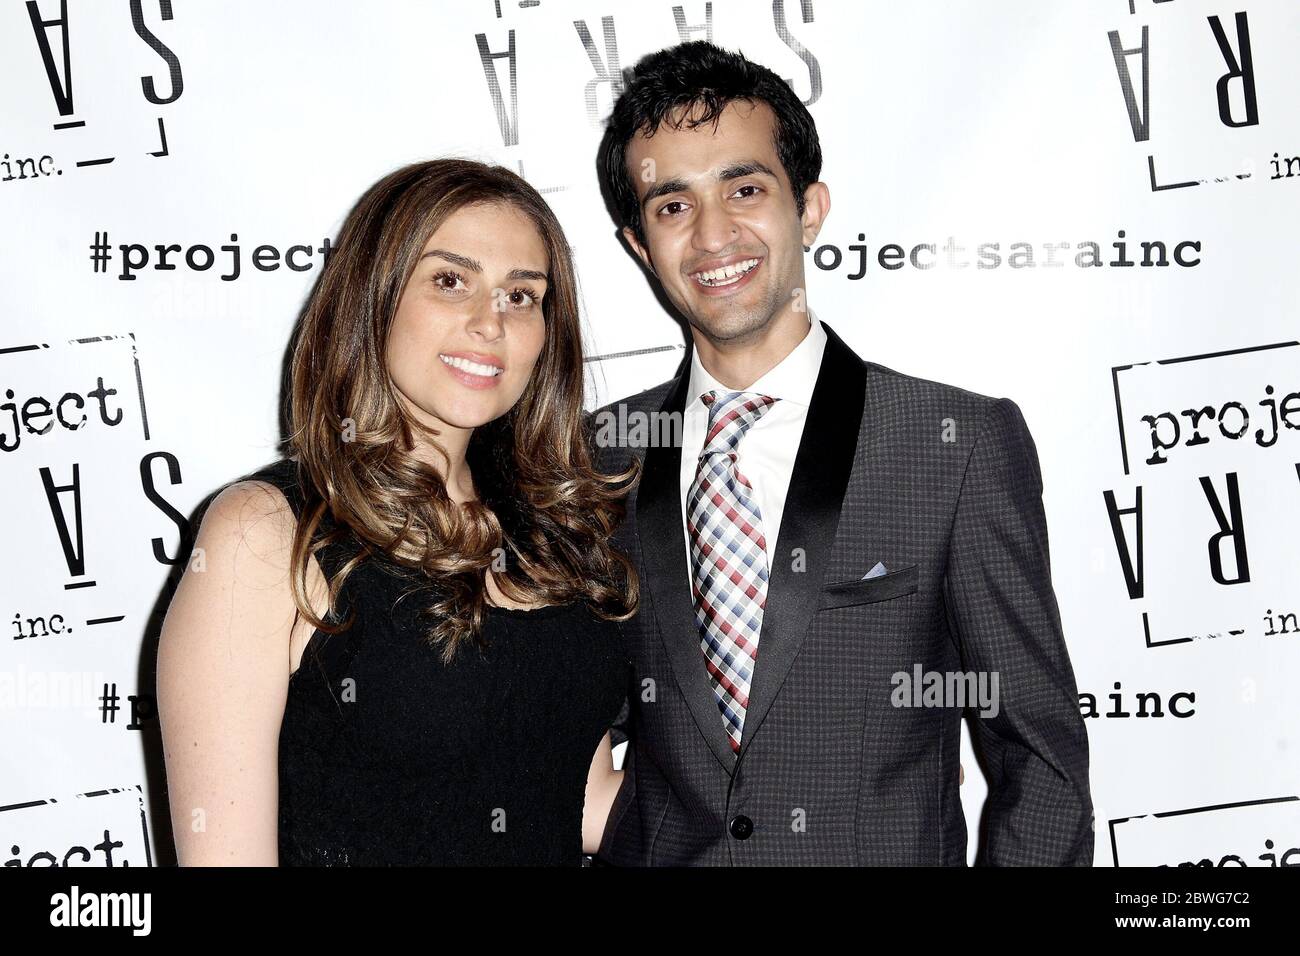 New York, NY, USA. 11 June, 2015. Z-100 NY overnight radio host, Shelley Rome, Project Sara Inc. Co-Founder, Viraj Borkar at the Launch Of Dining Reconstructed: An Off Menu Experience at The Starrett Leigh Building. Credit: Steve Mack/Alamy Stock Photo